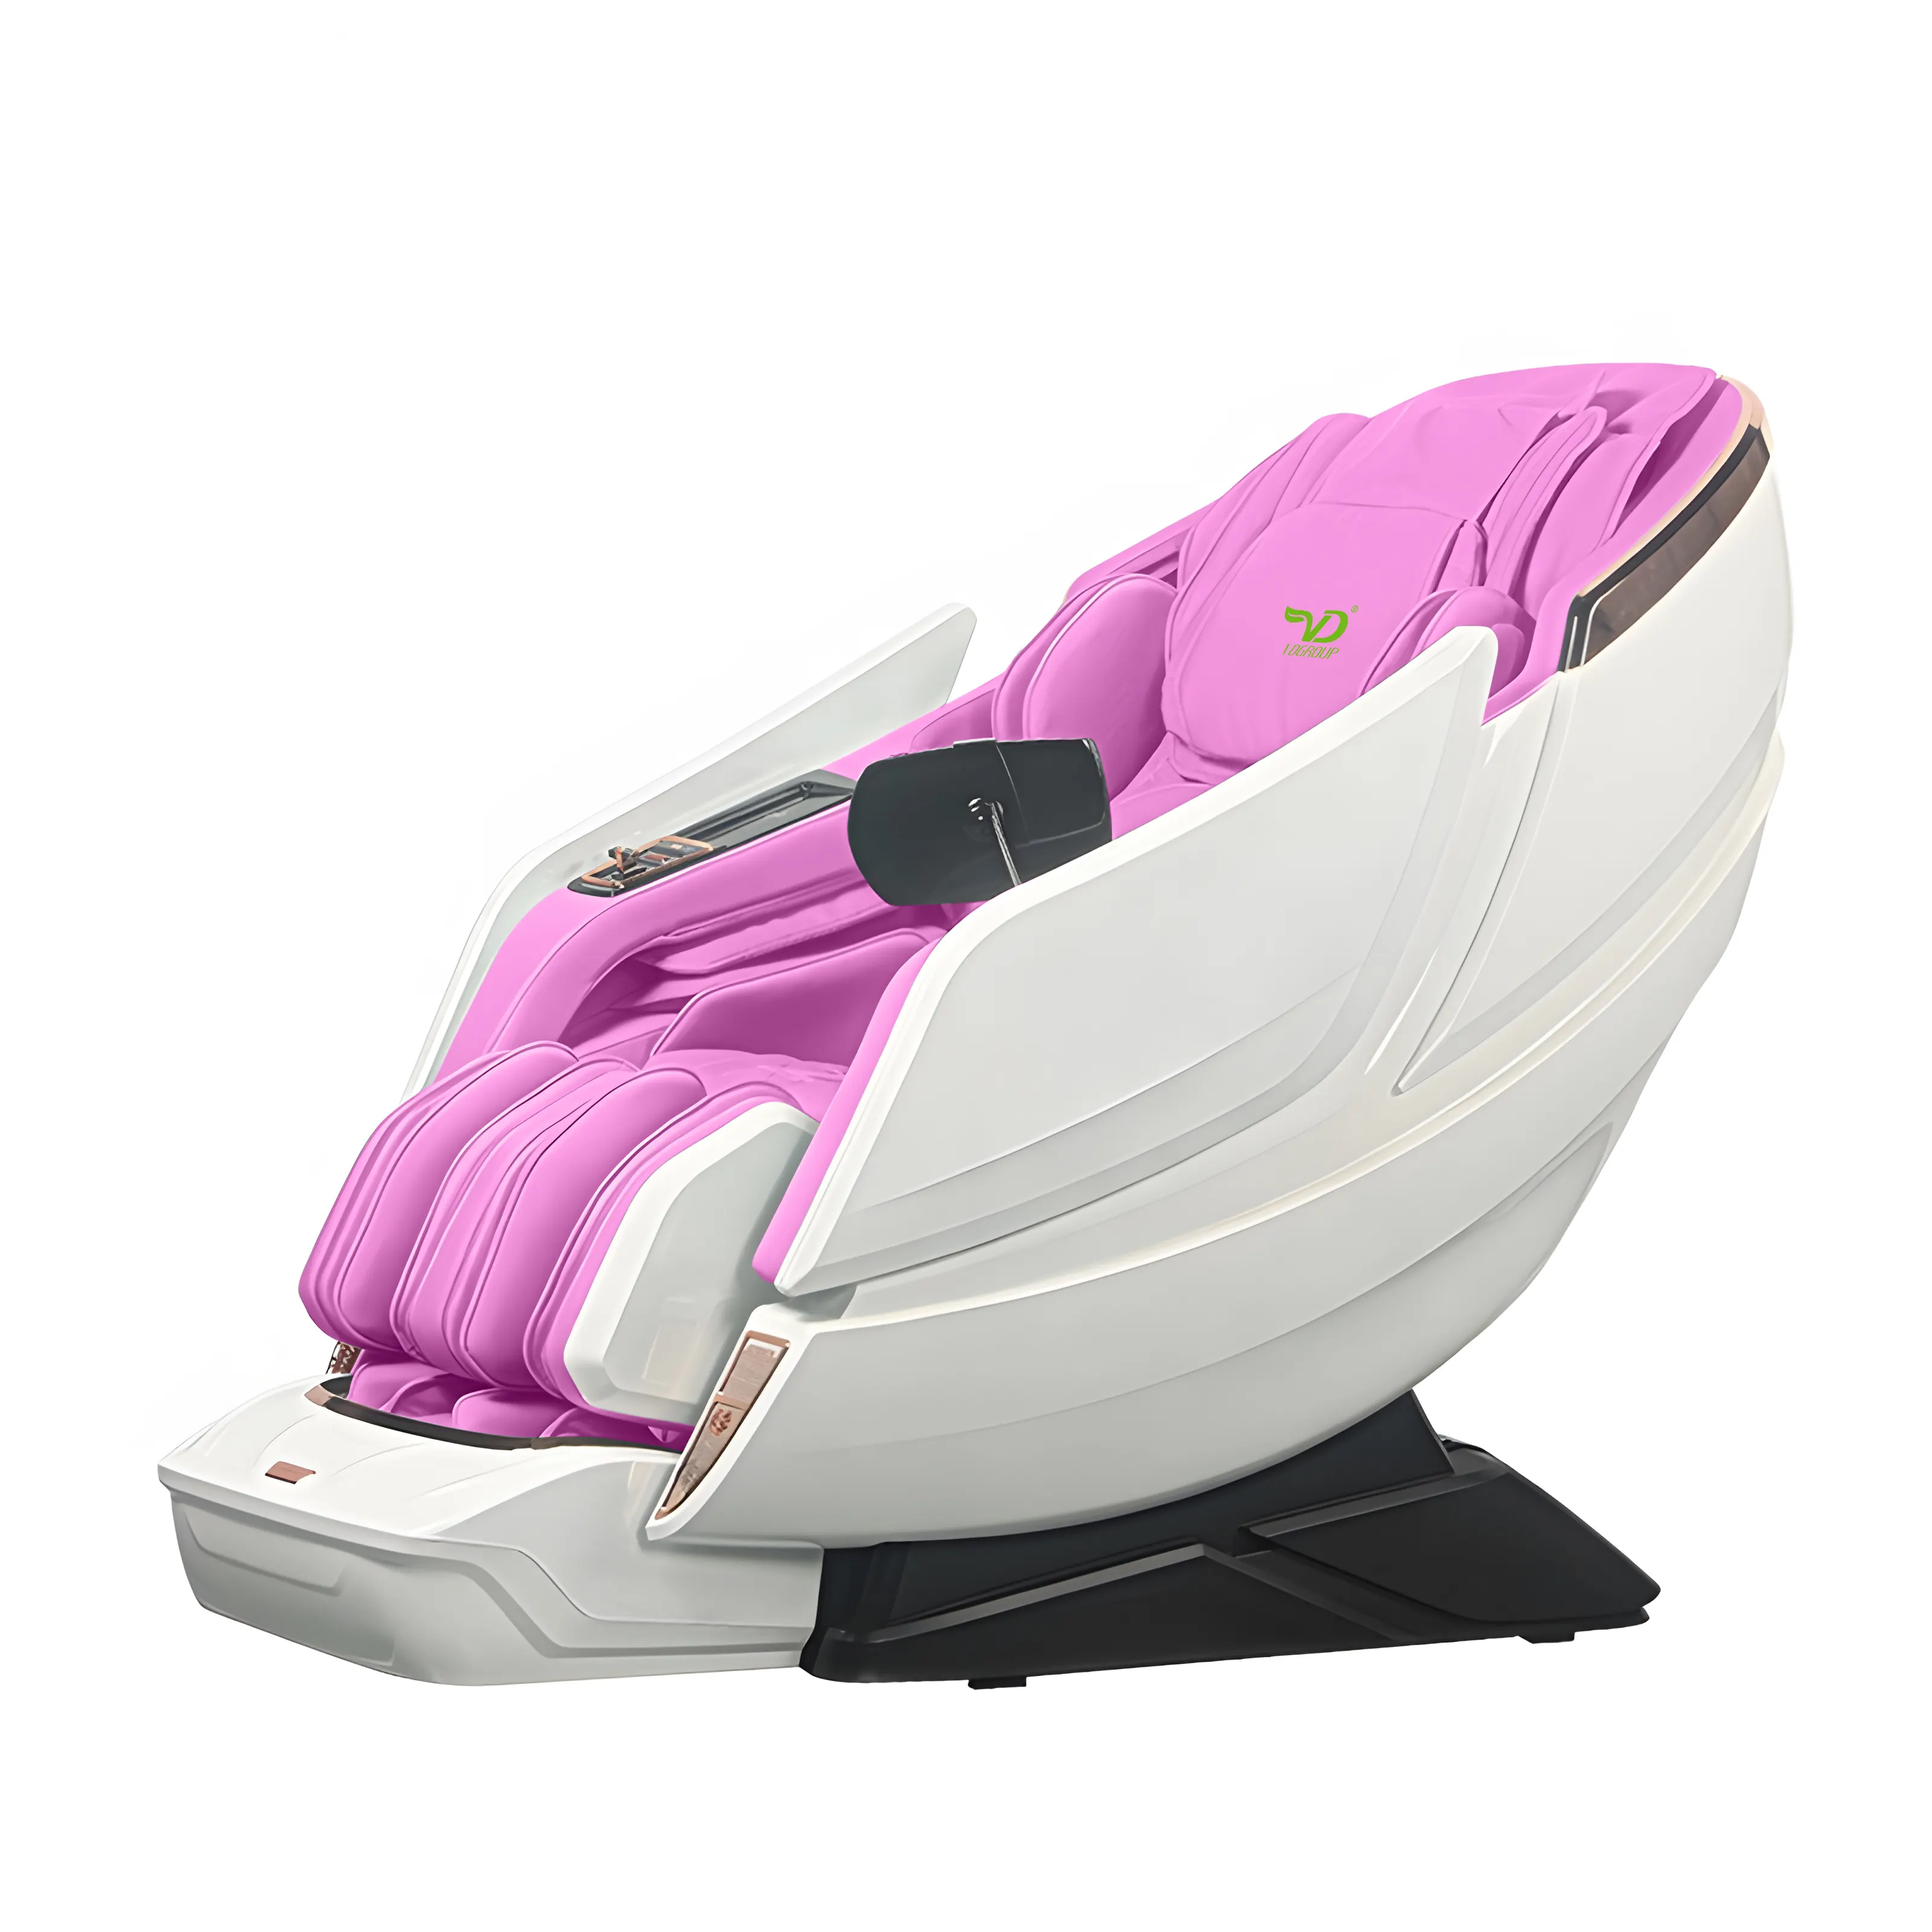 4D luxury massage chair with touch screen remote control plus smart voice control